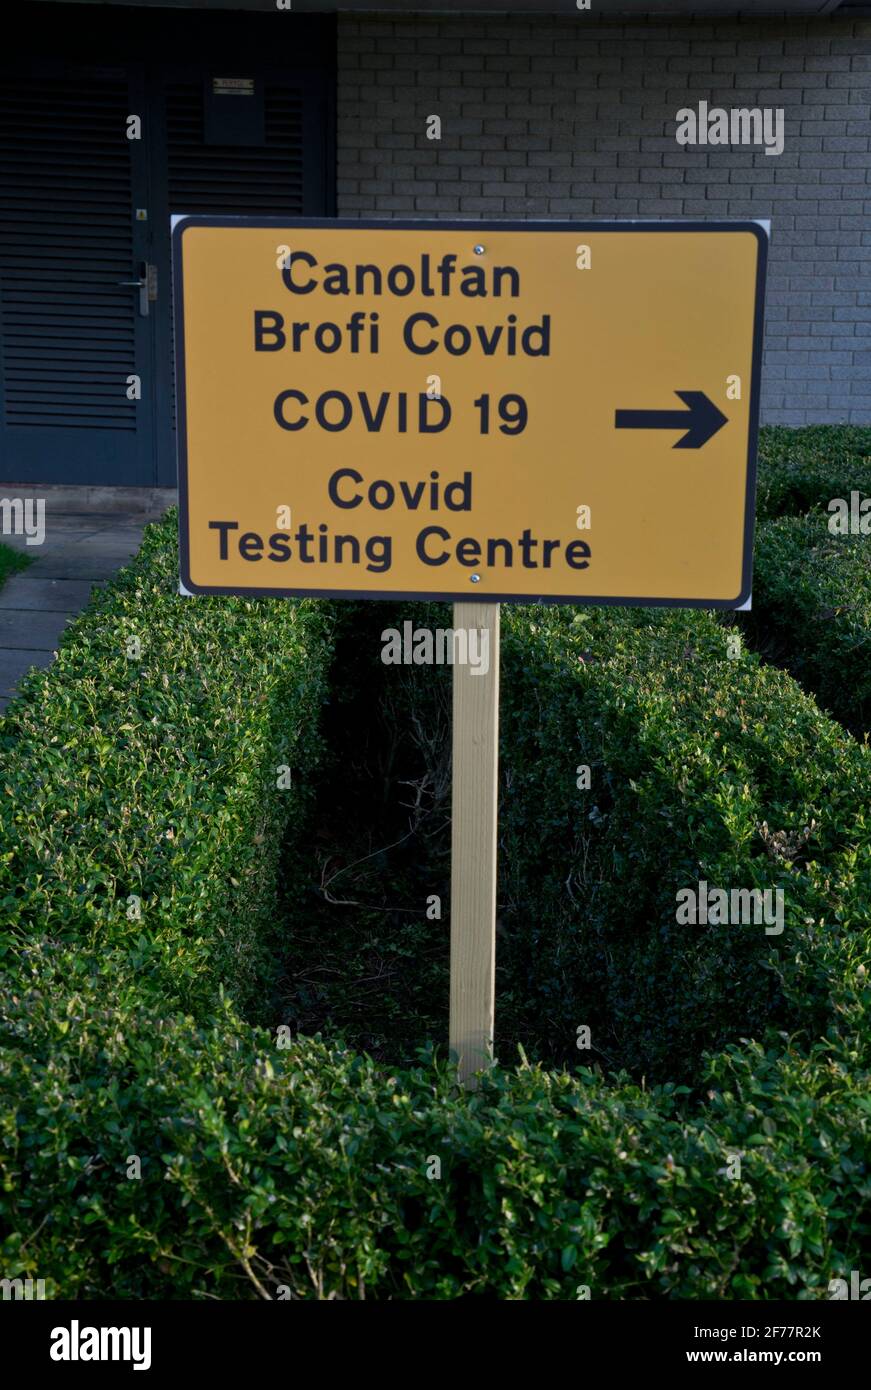 Covid-19 testing and vaccination centre with bilingual signs in Welsh and English at the campus of  Aberystwyth University, Ceredigion, Wales, UK. Stock Photo